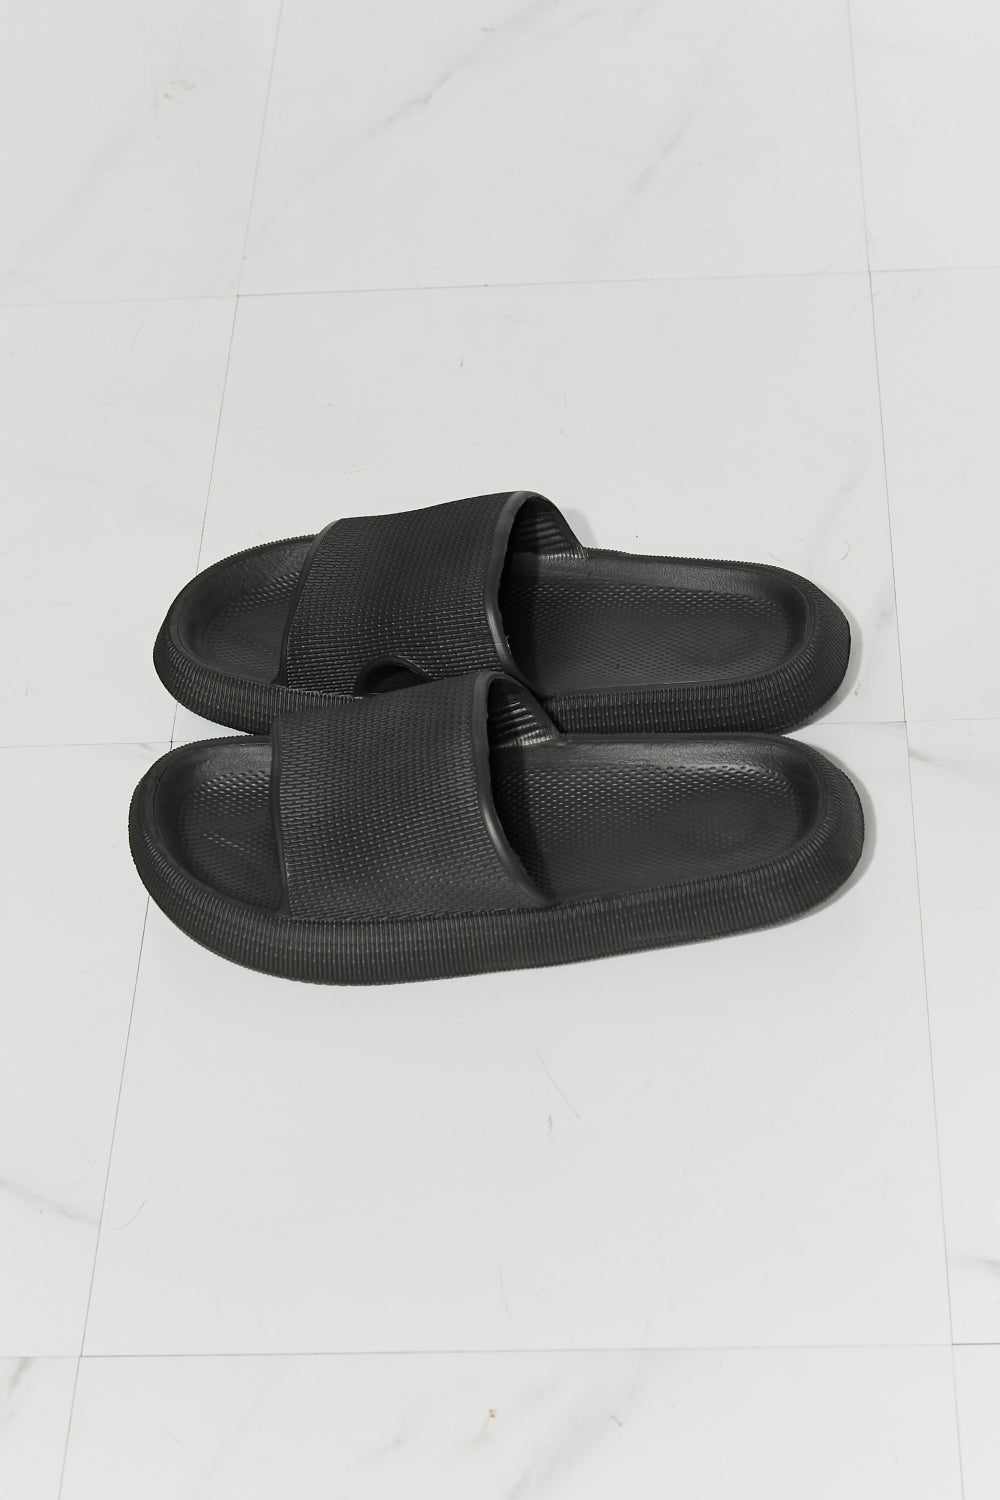 MMShoes Arms Around Me Open Toe Black Slide - EMMY